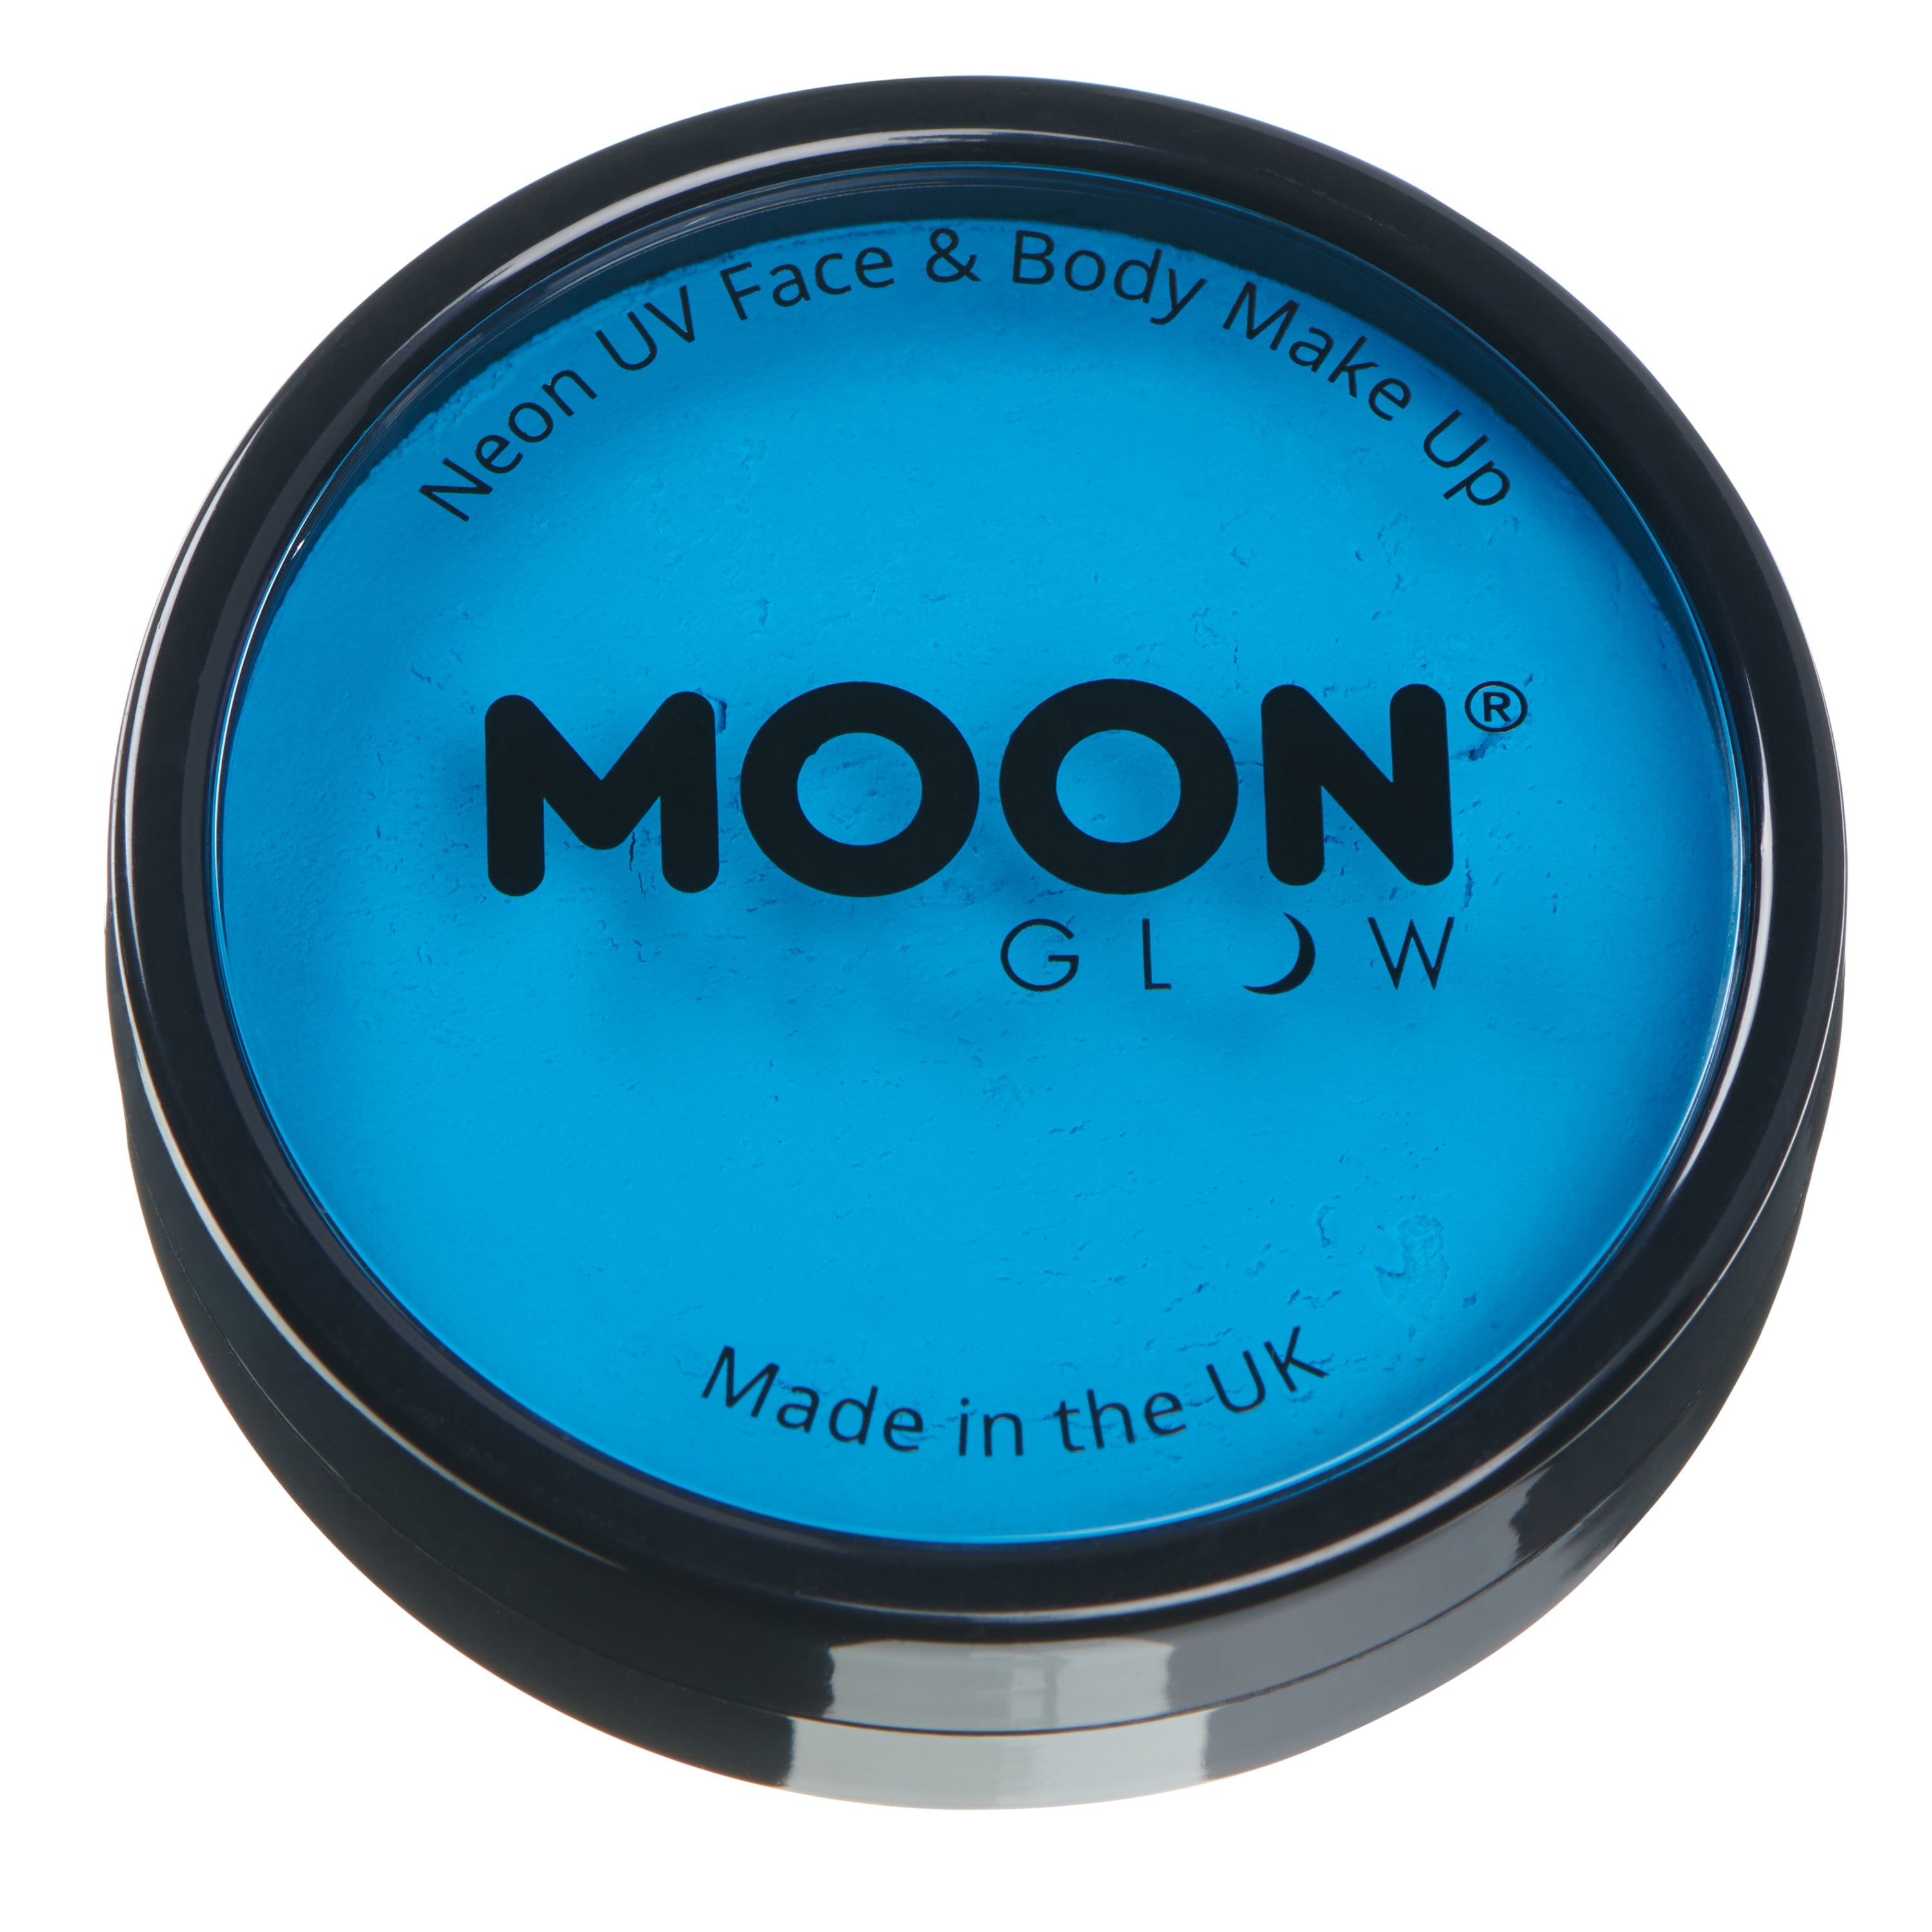 Intense Red - Neon UV Glow Blacklight Professional Face Paint, 36g. Cosmetically certified, FDA & Health Canada compliant, cruelty free and vegan.